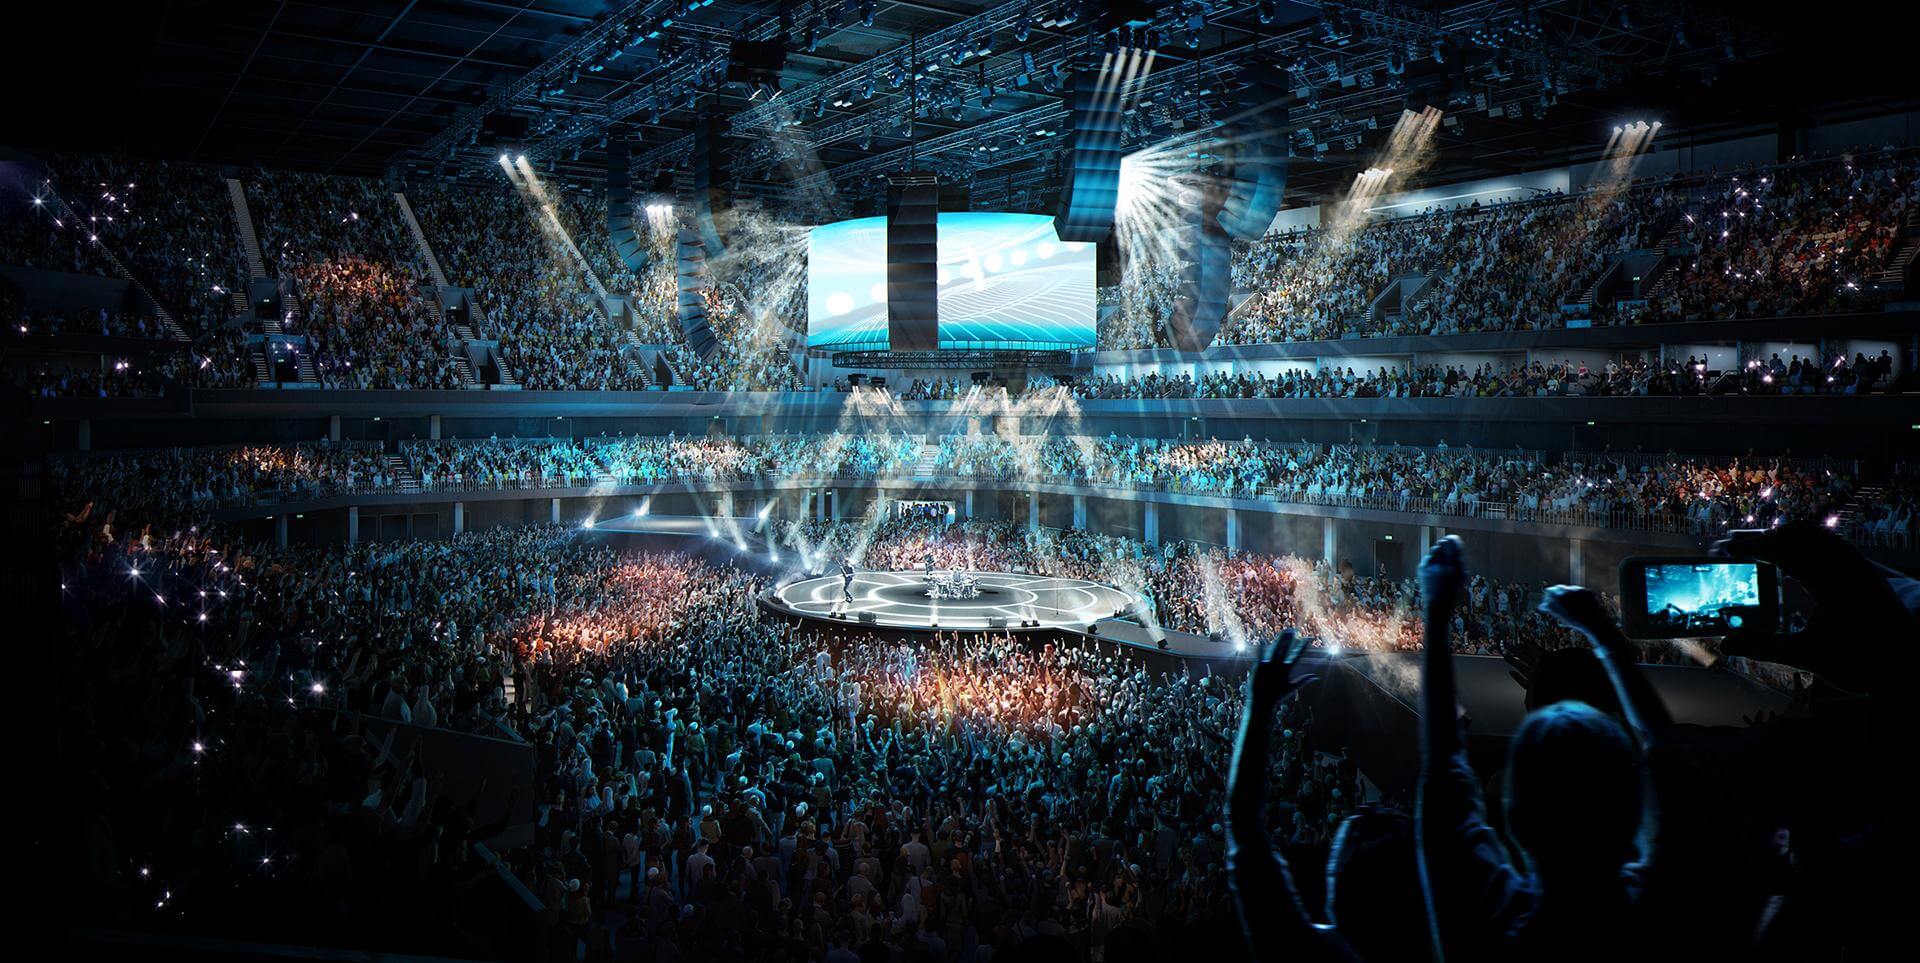 Audience Systems will supply stands and seats for the new OVG Arena in Manchester